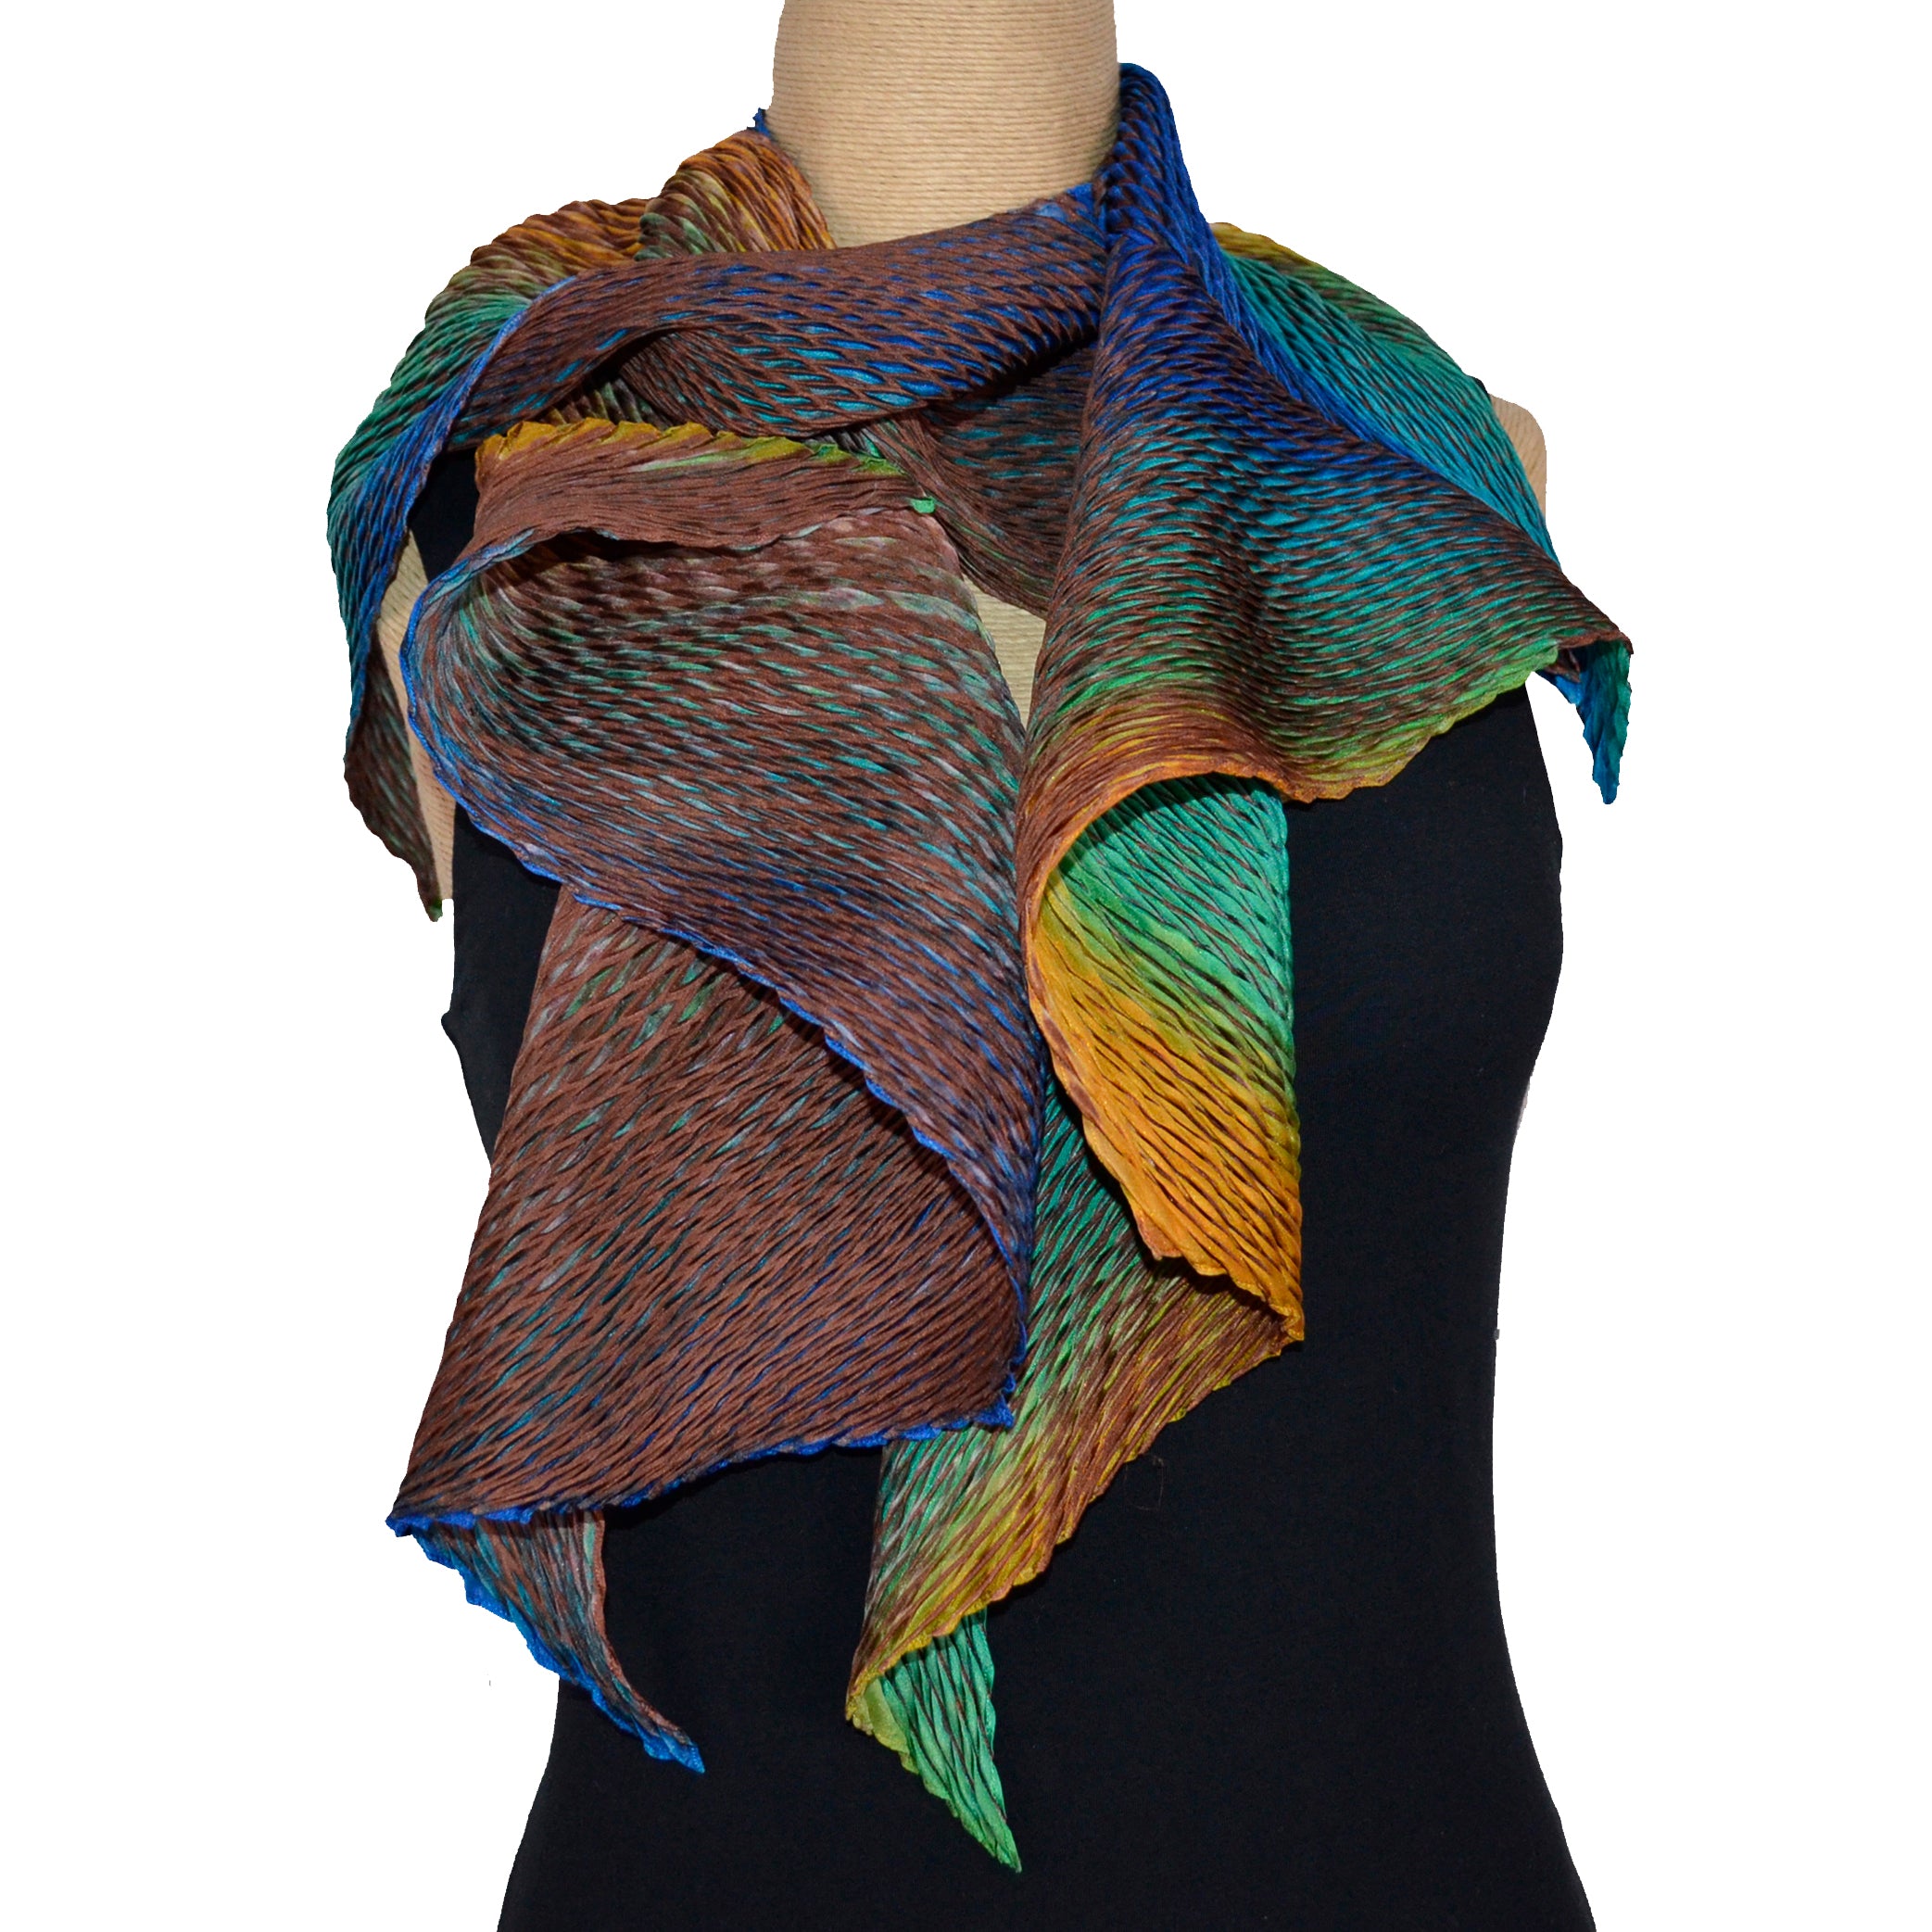 Cathayana Scarf, Zigzag, Brown/Blue/Turquoise